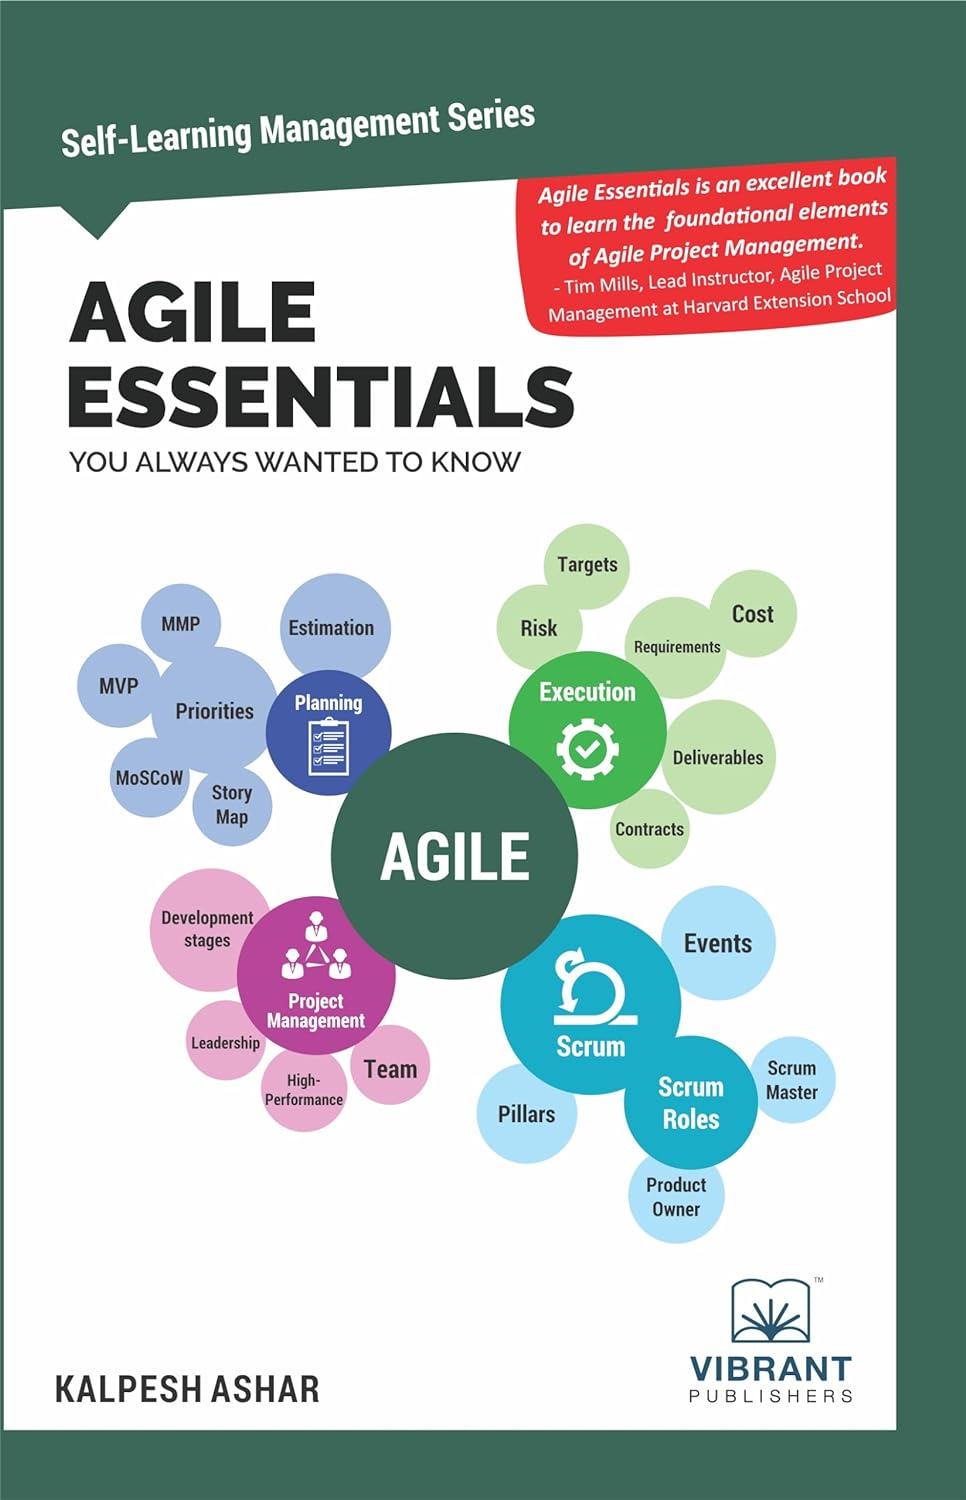 agile essentials you always wanted to know self-learning management series 1st edition vibrant publishers,